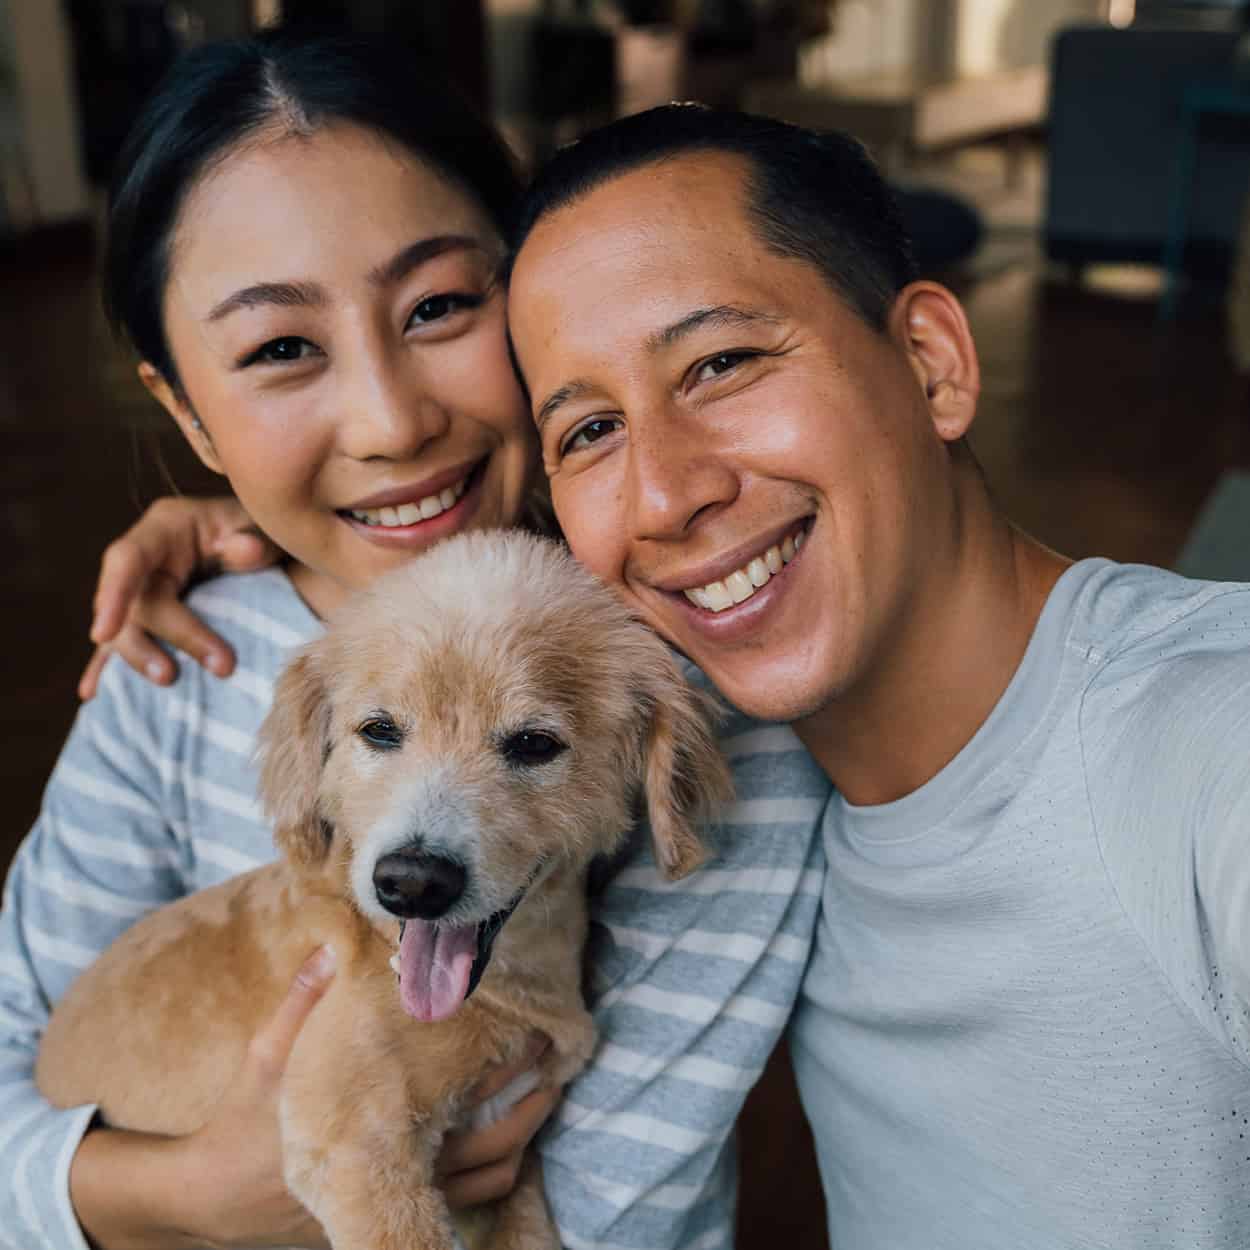 man and woman smiling with dog during at-home addiction rehab